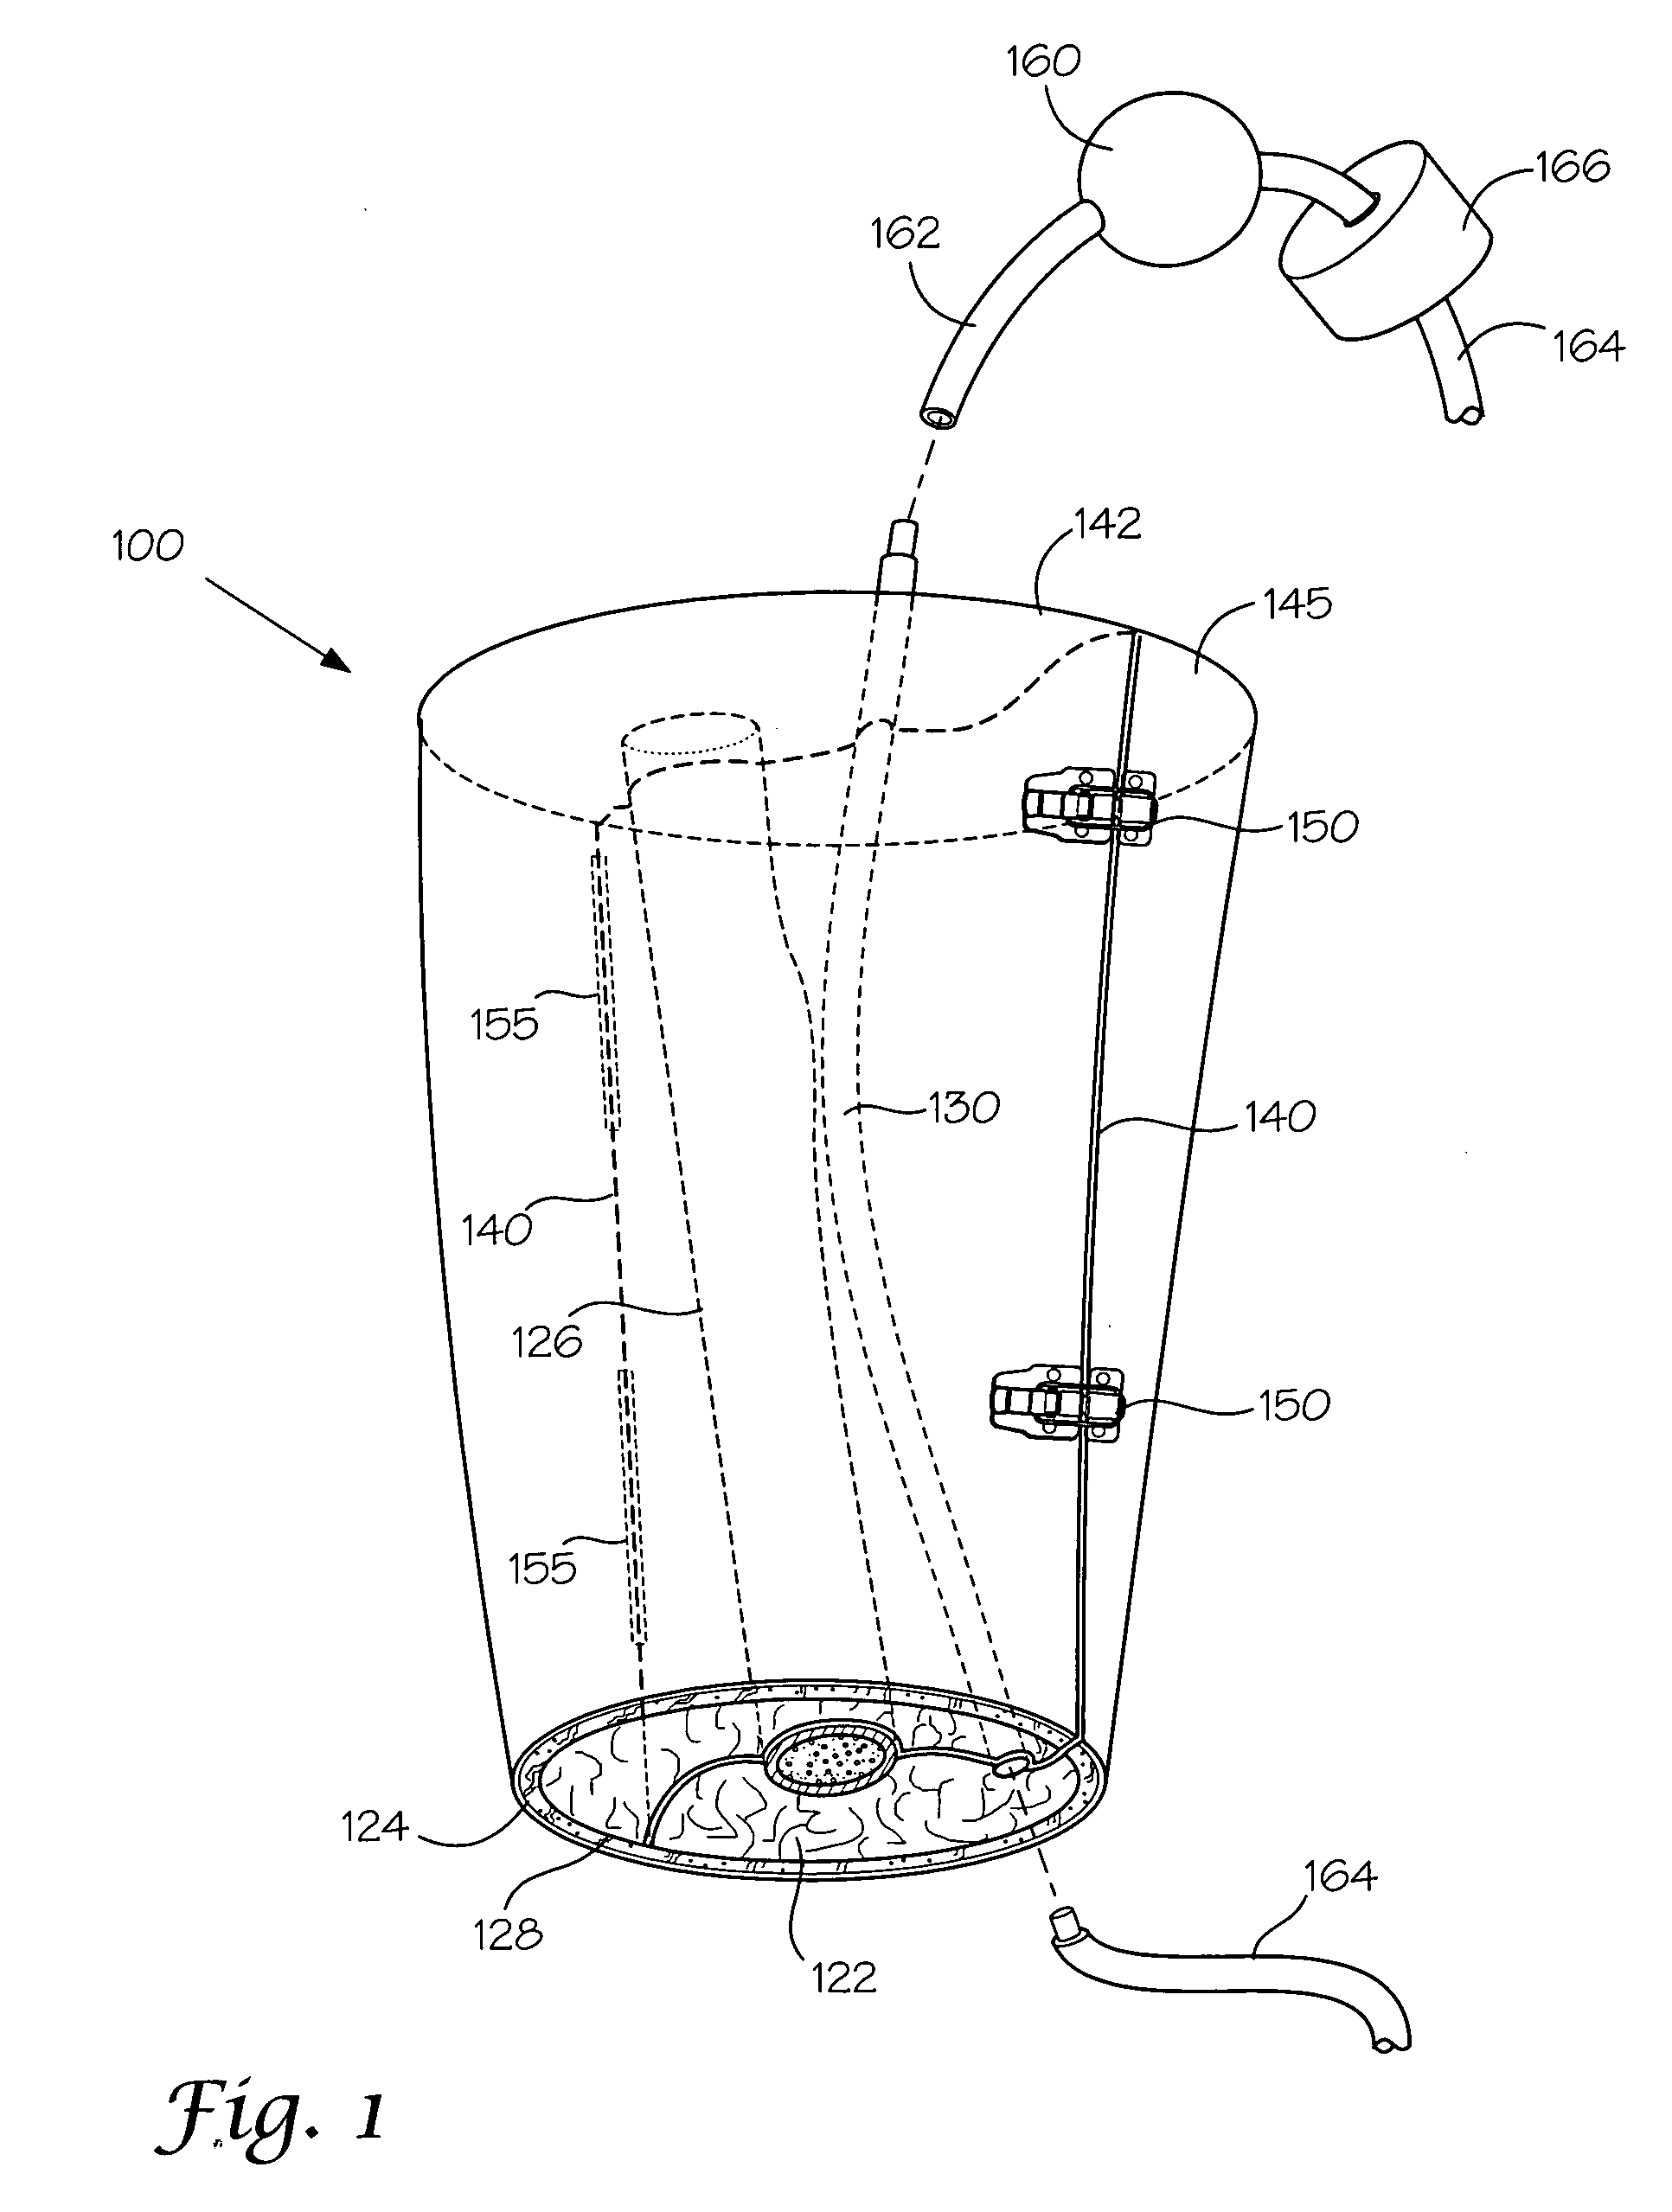 Models and methods of using same for testing medical devices